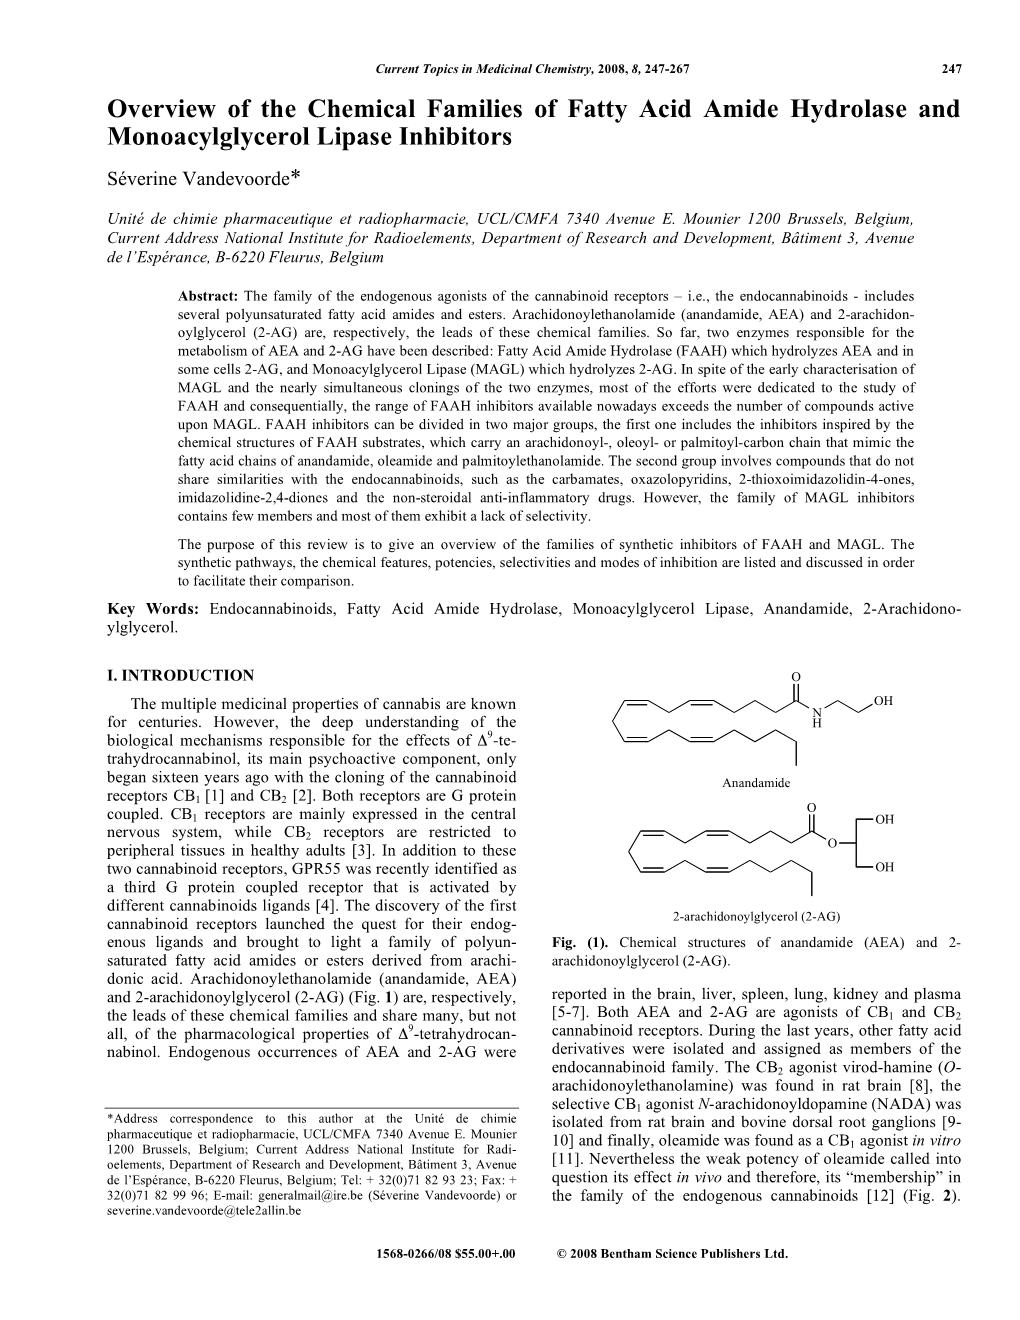 Overview of the Chemical Families of Fatty Acid Amide Hydrolase and Monoacylglycerol Lipase Inhibitors Séverine Vandevoorde*